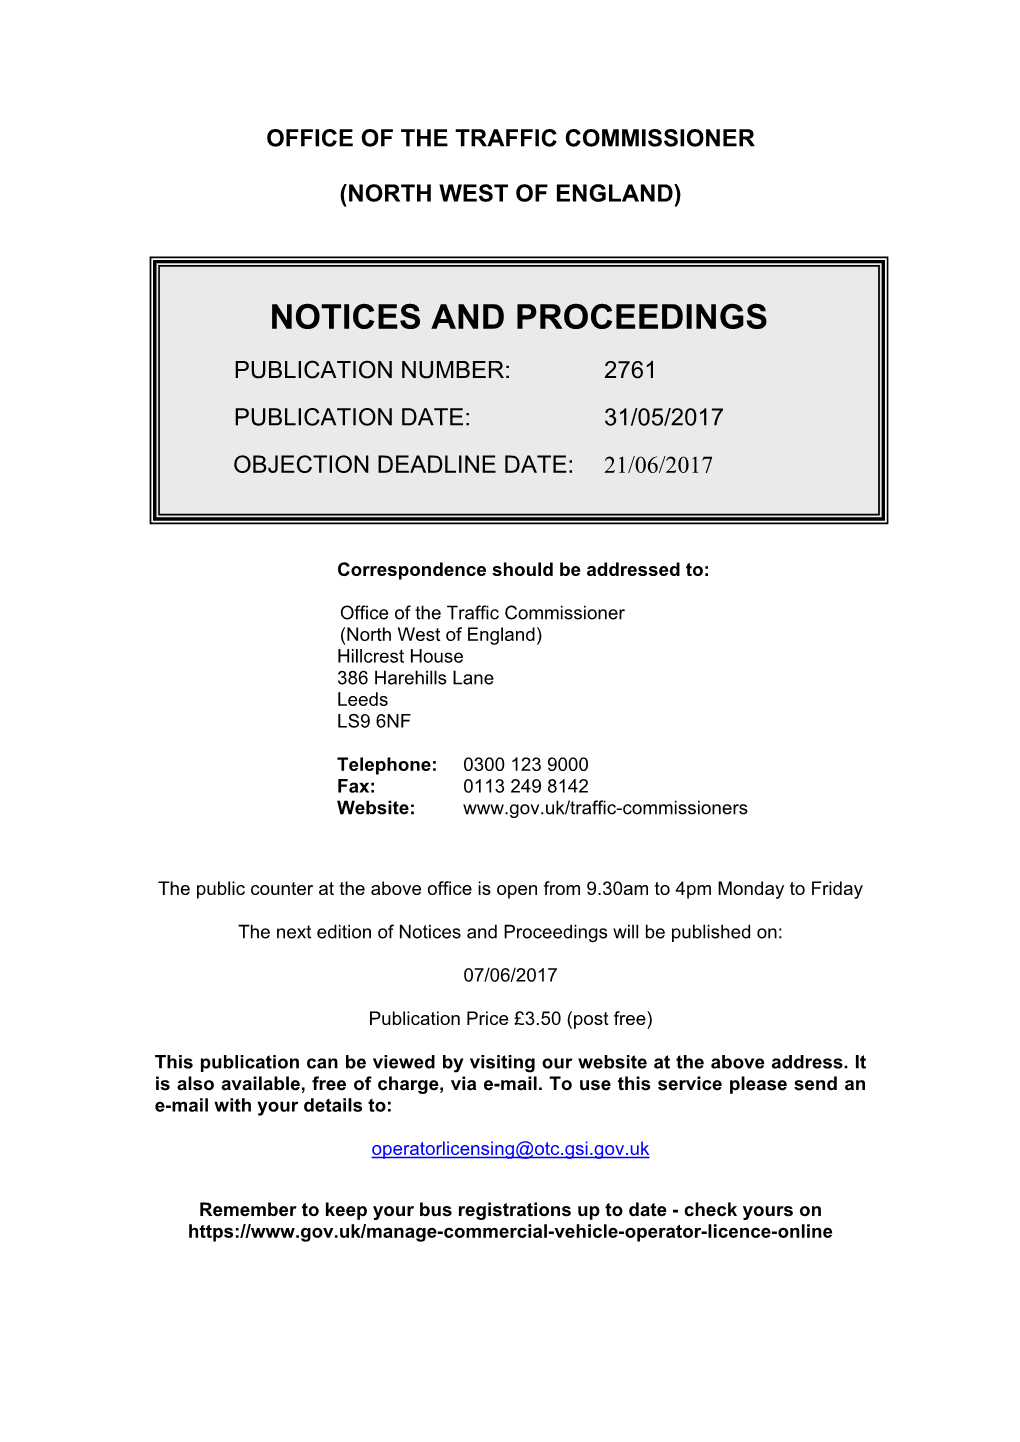 Notices and Proceedings 2761: Office of the Traffic Commissioner, North